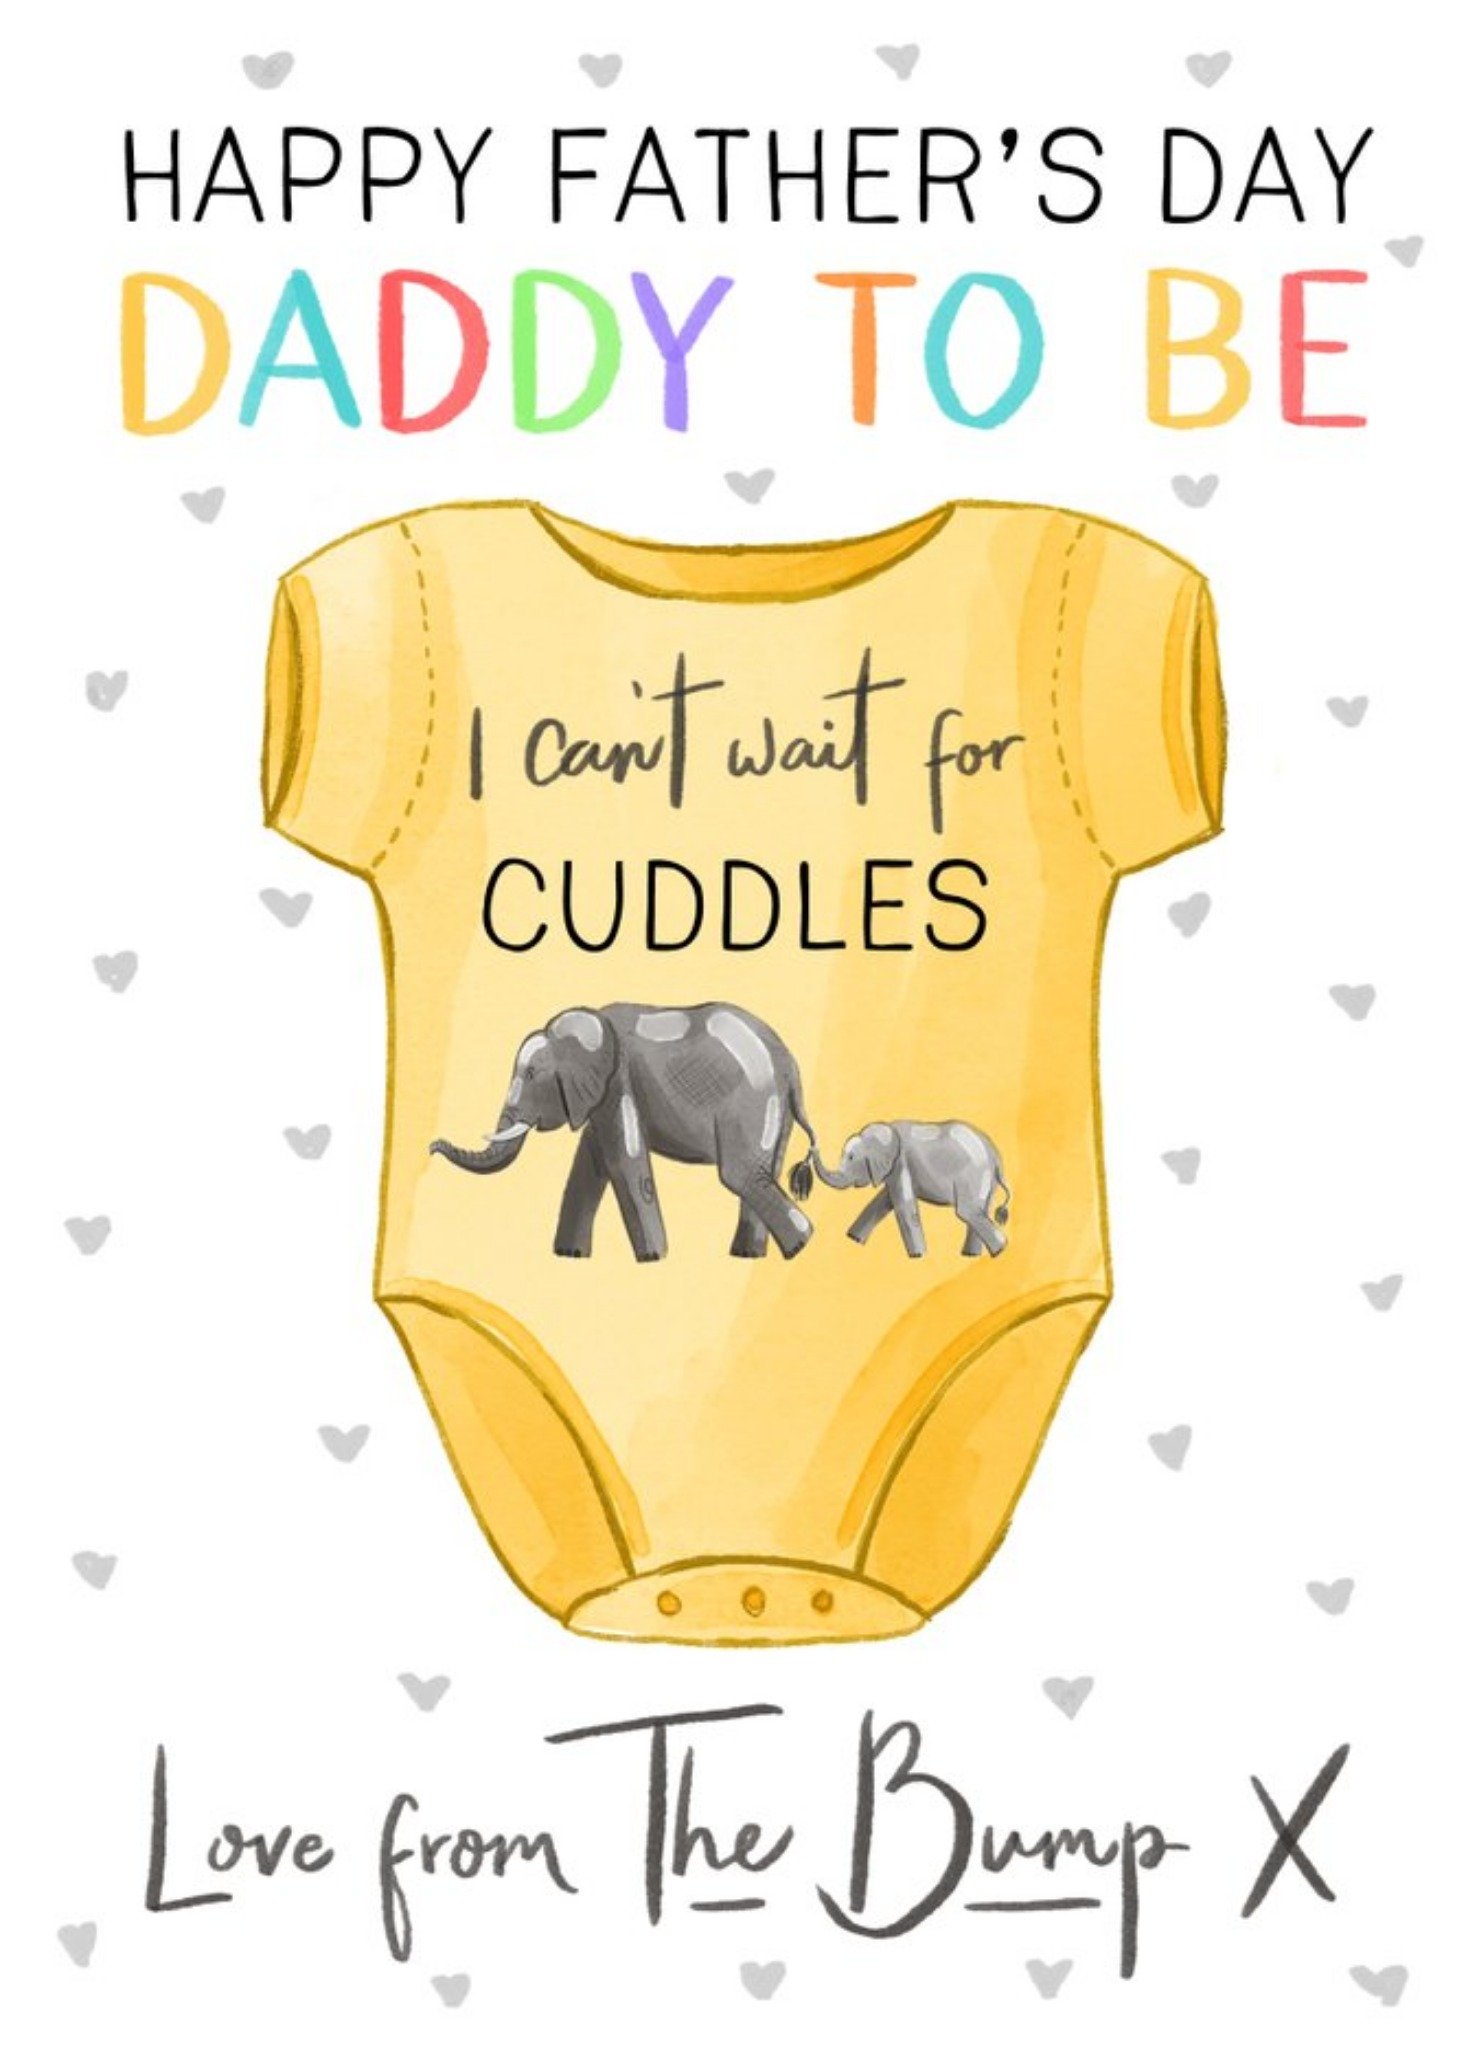 Okey Dokey Design Cute Illustration Happy Fathers Day Daddy To Be Love From The Bump Card Ecard